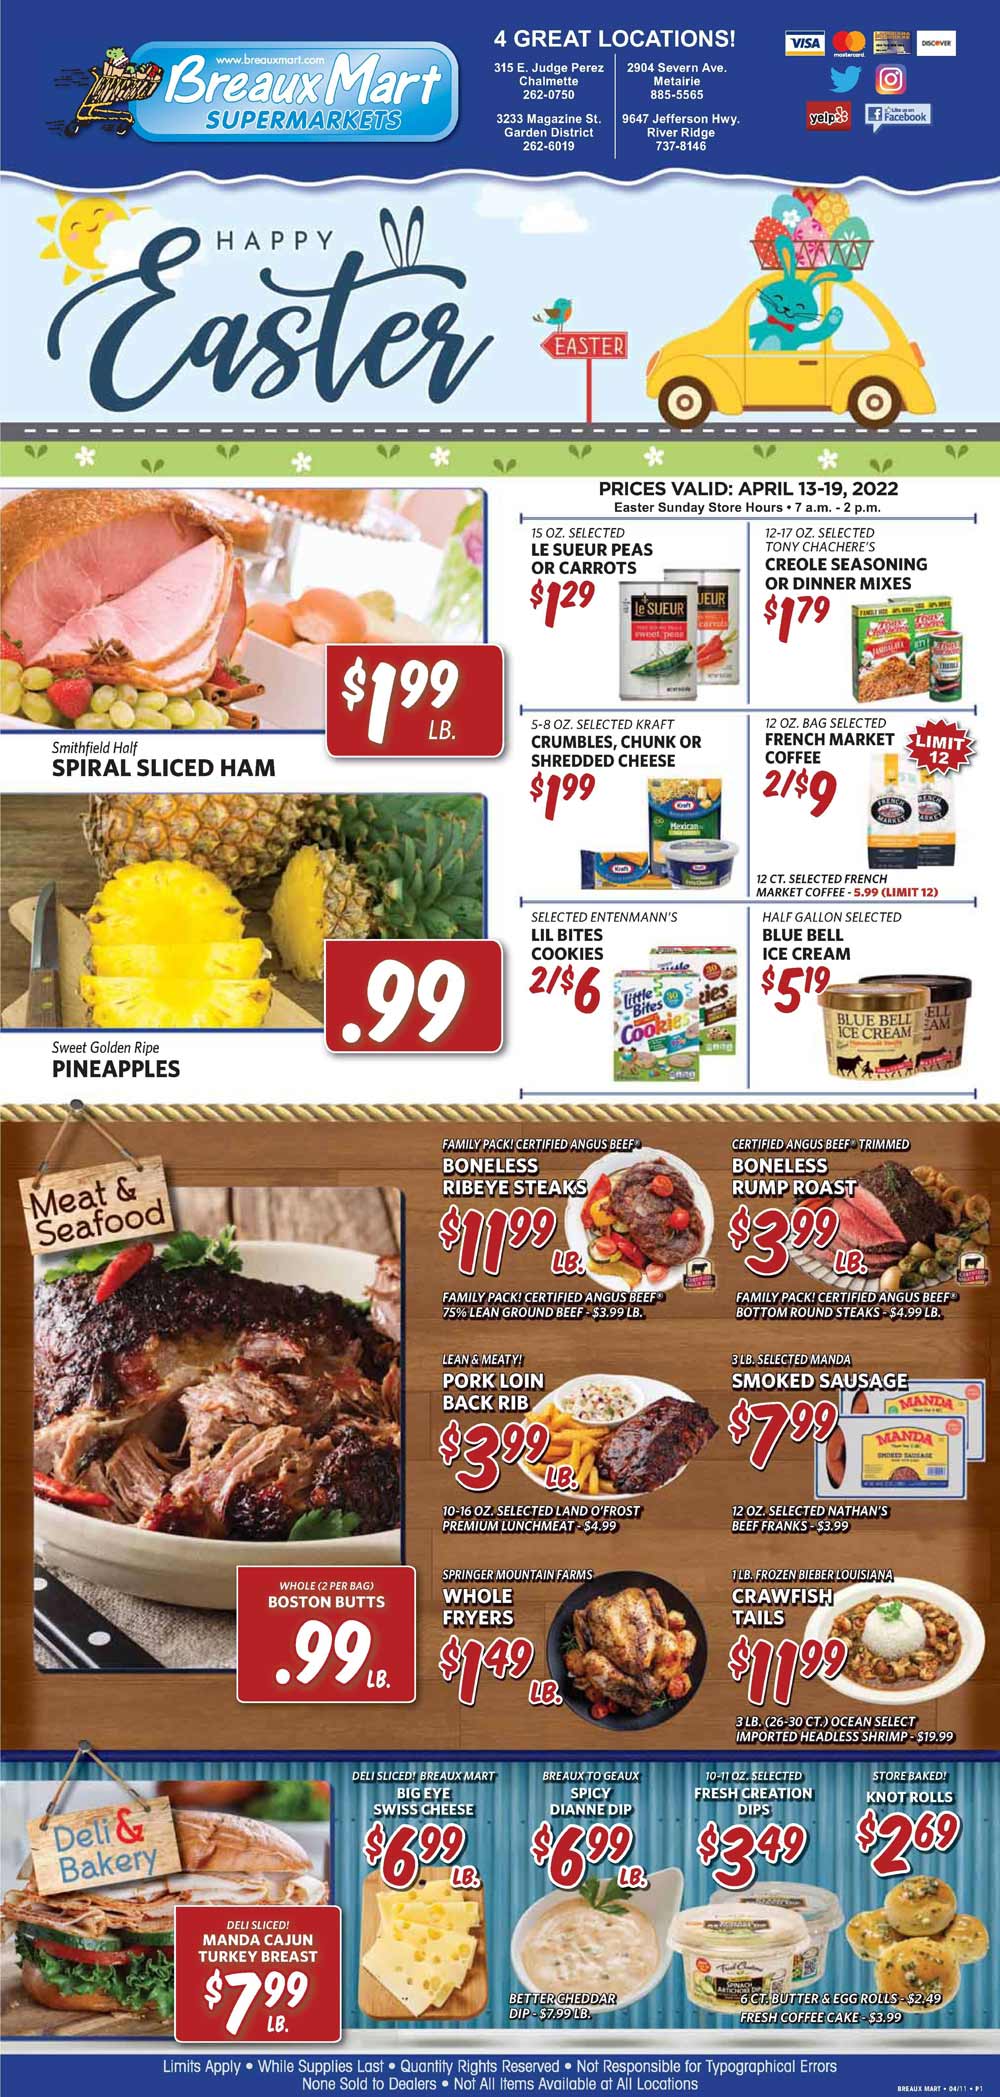 Breaux Mart Weekly Ad (4/13/22 - 4/19/22)